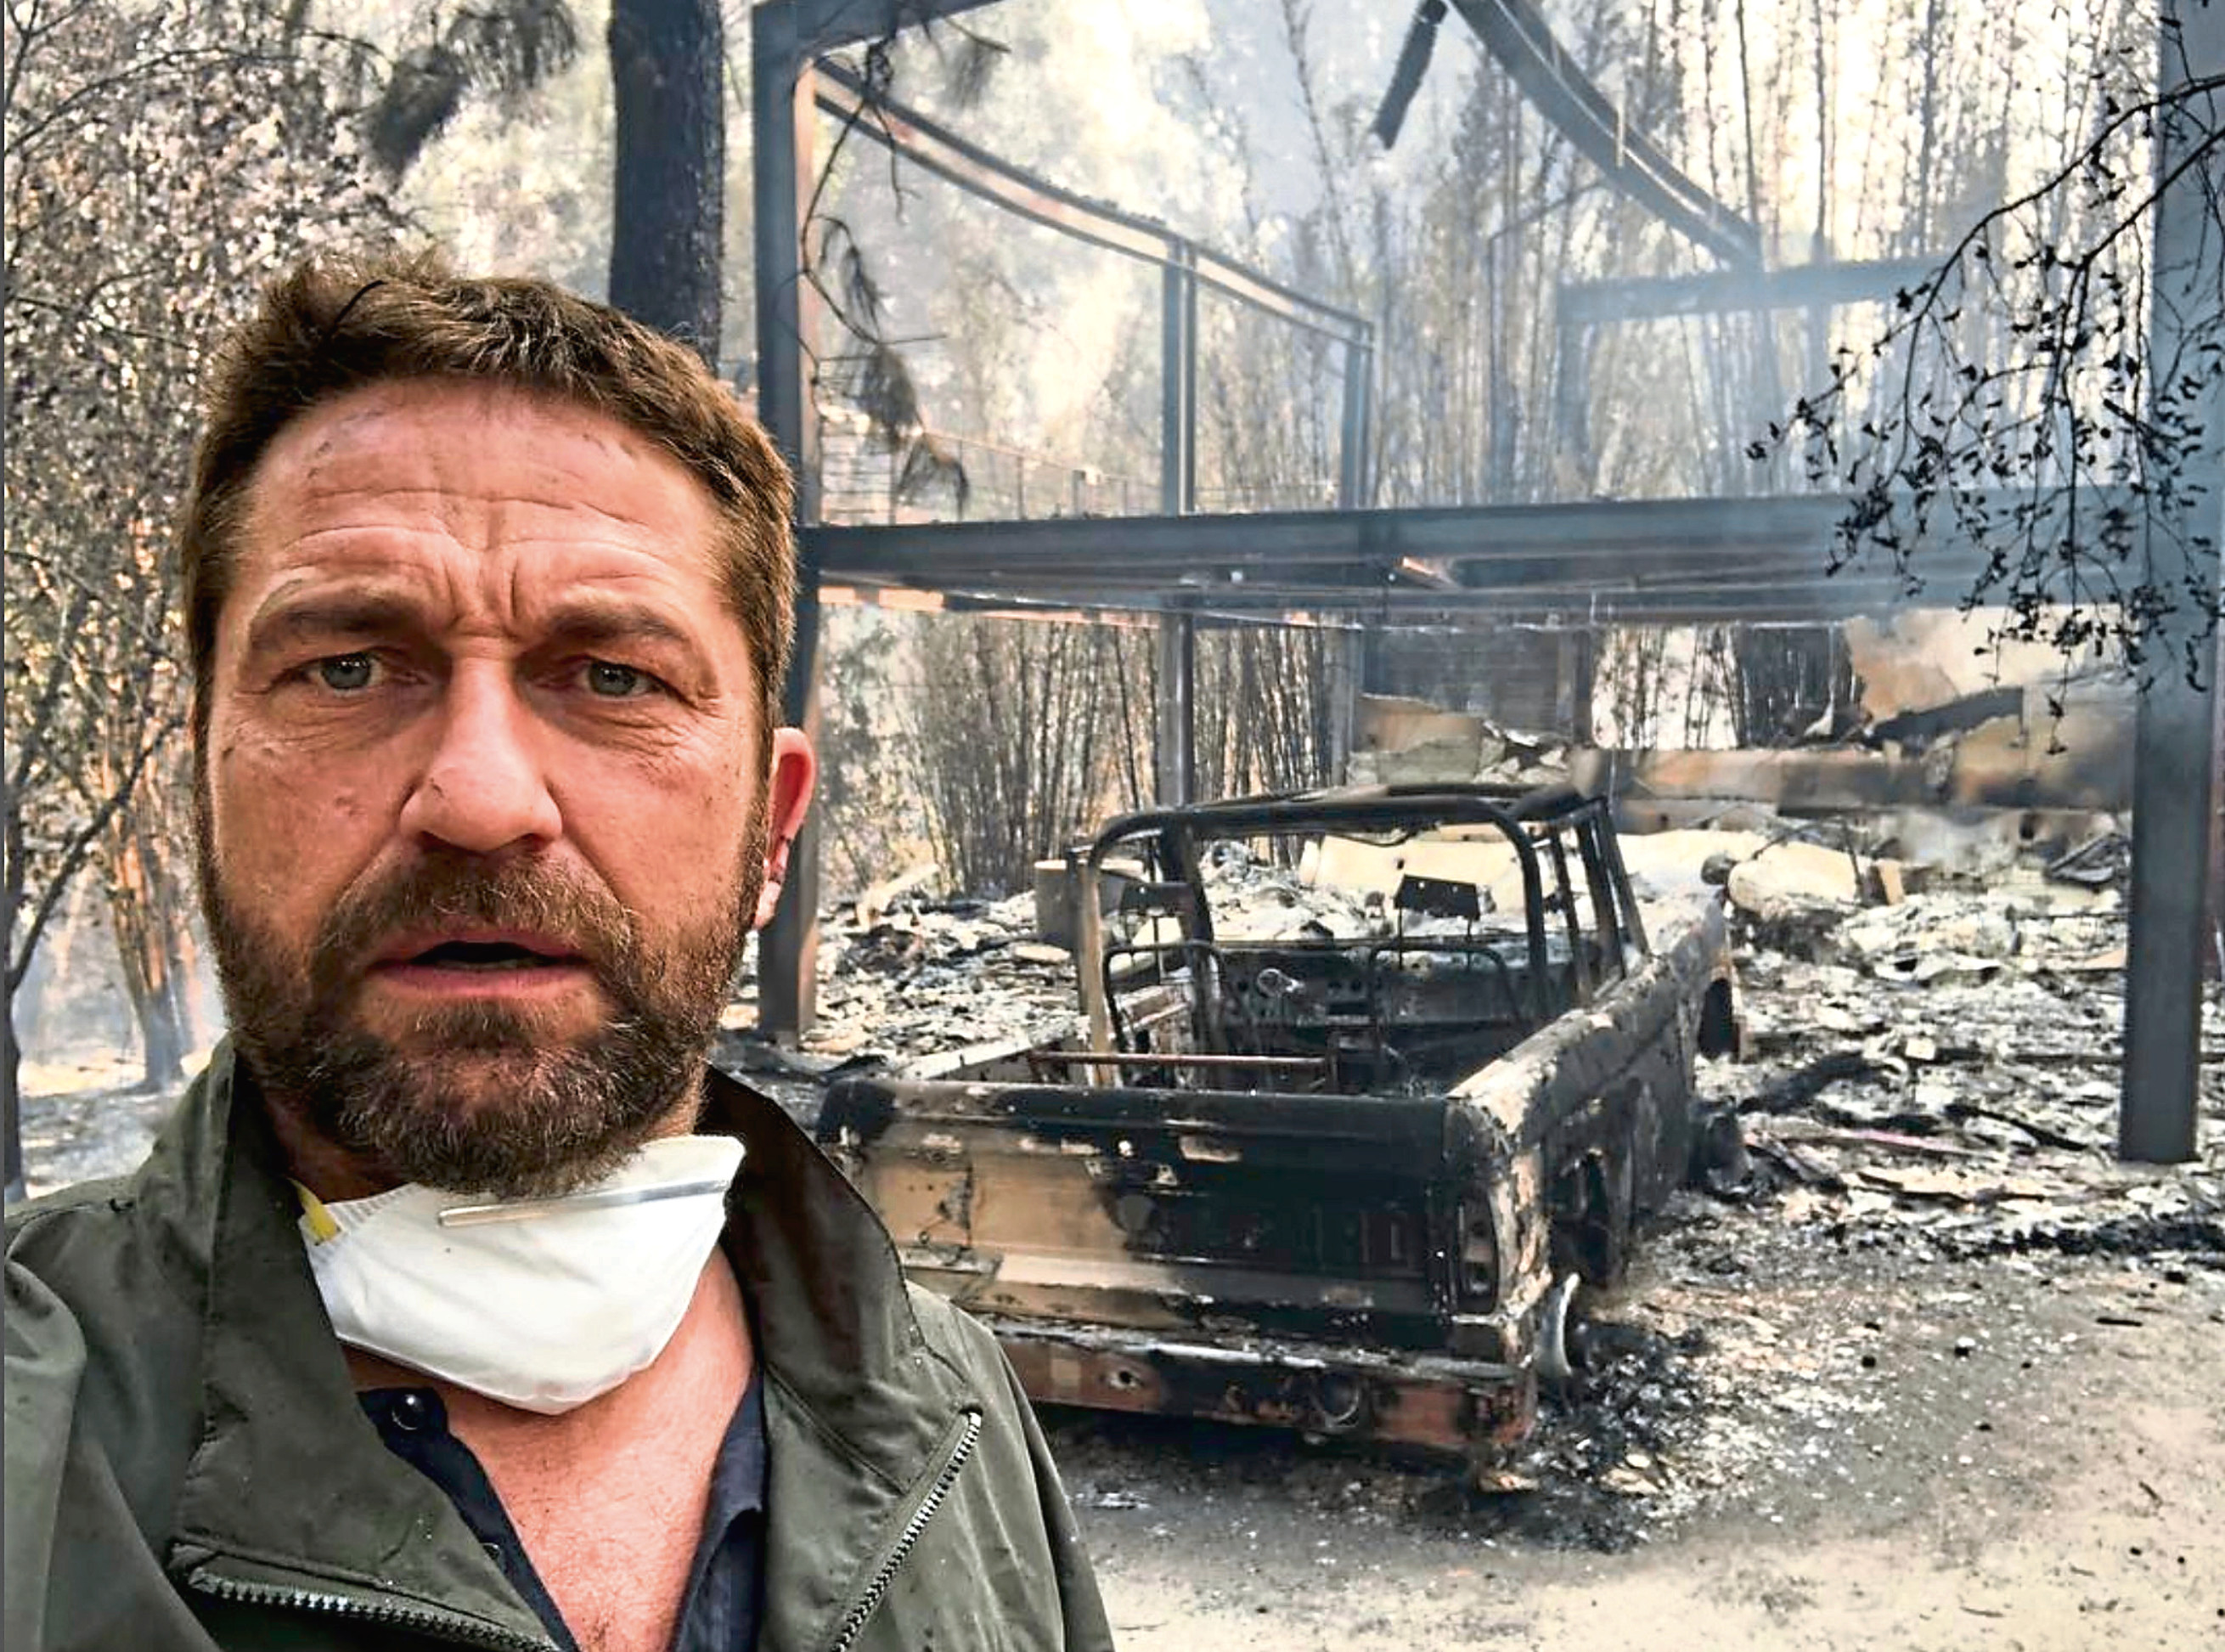 Gerard Butler shared a photo of his home, which was destroyed by the Woolsey Fire in southern California